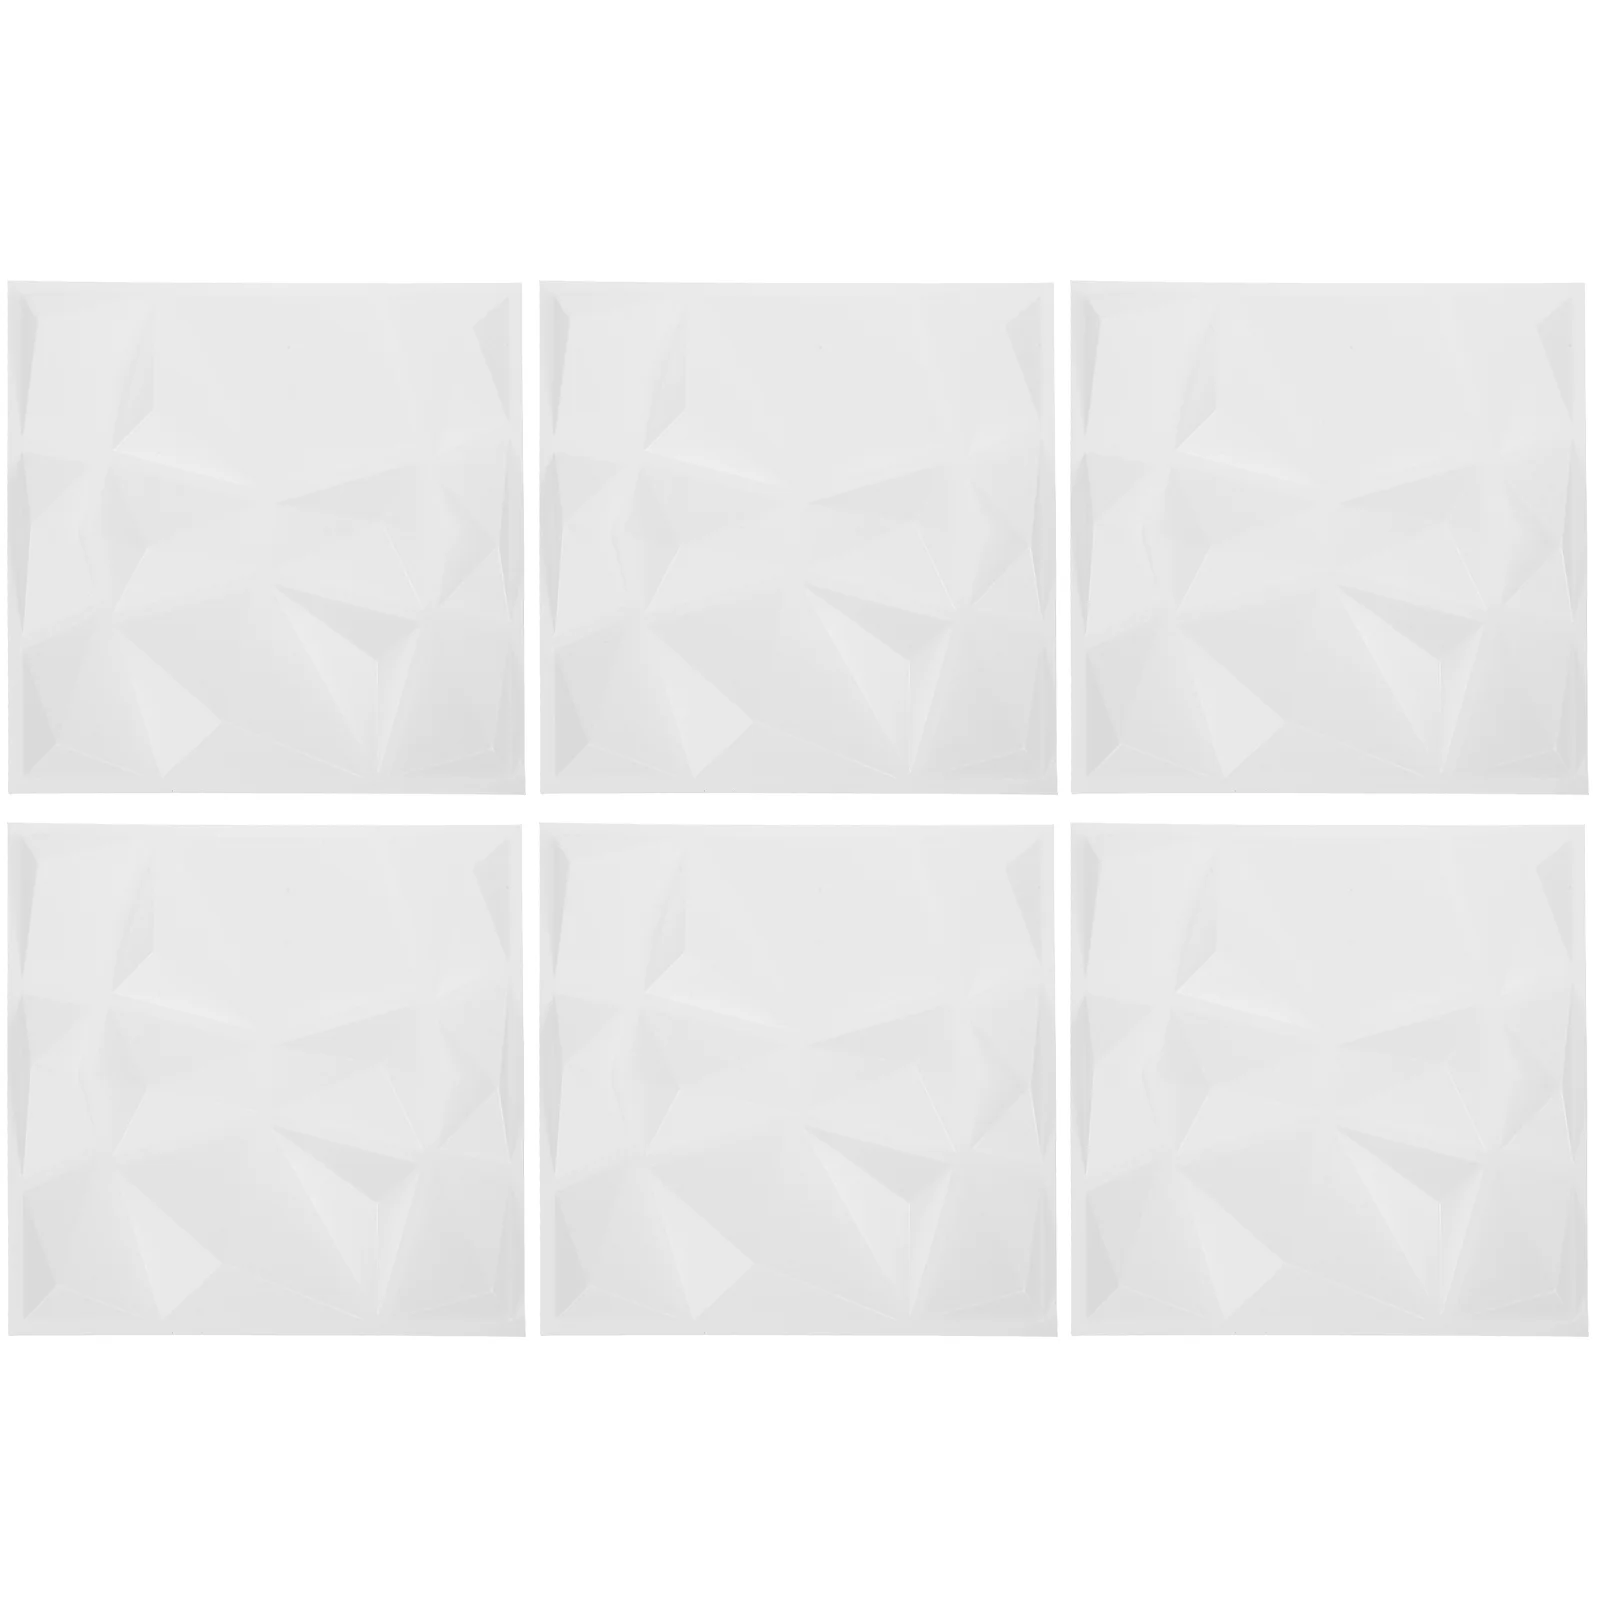 

6 Pcs Three-dimensional Wall Panel Panels 3D Paneling Wallpaper Interior Decor Hotel PVC for Board Peel and Stick Living Room